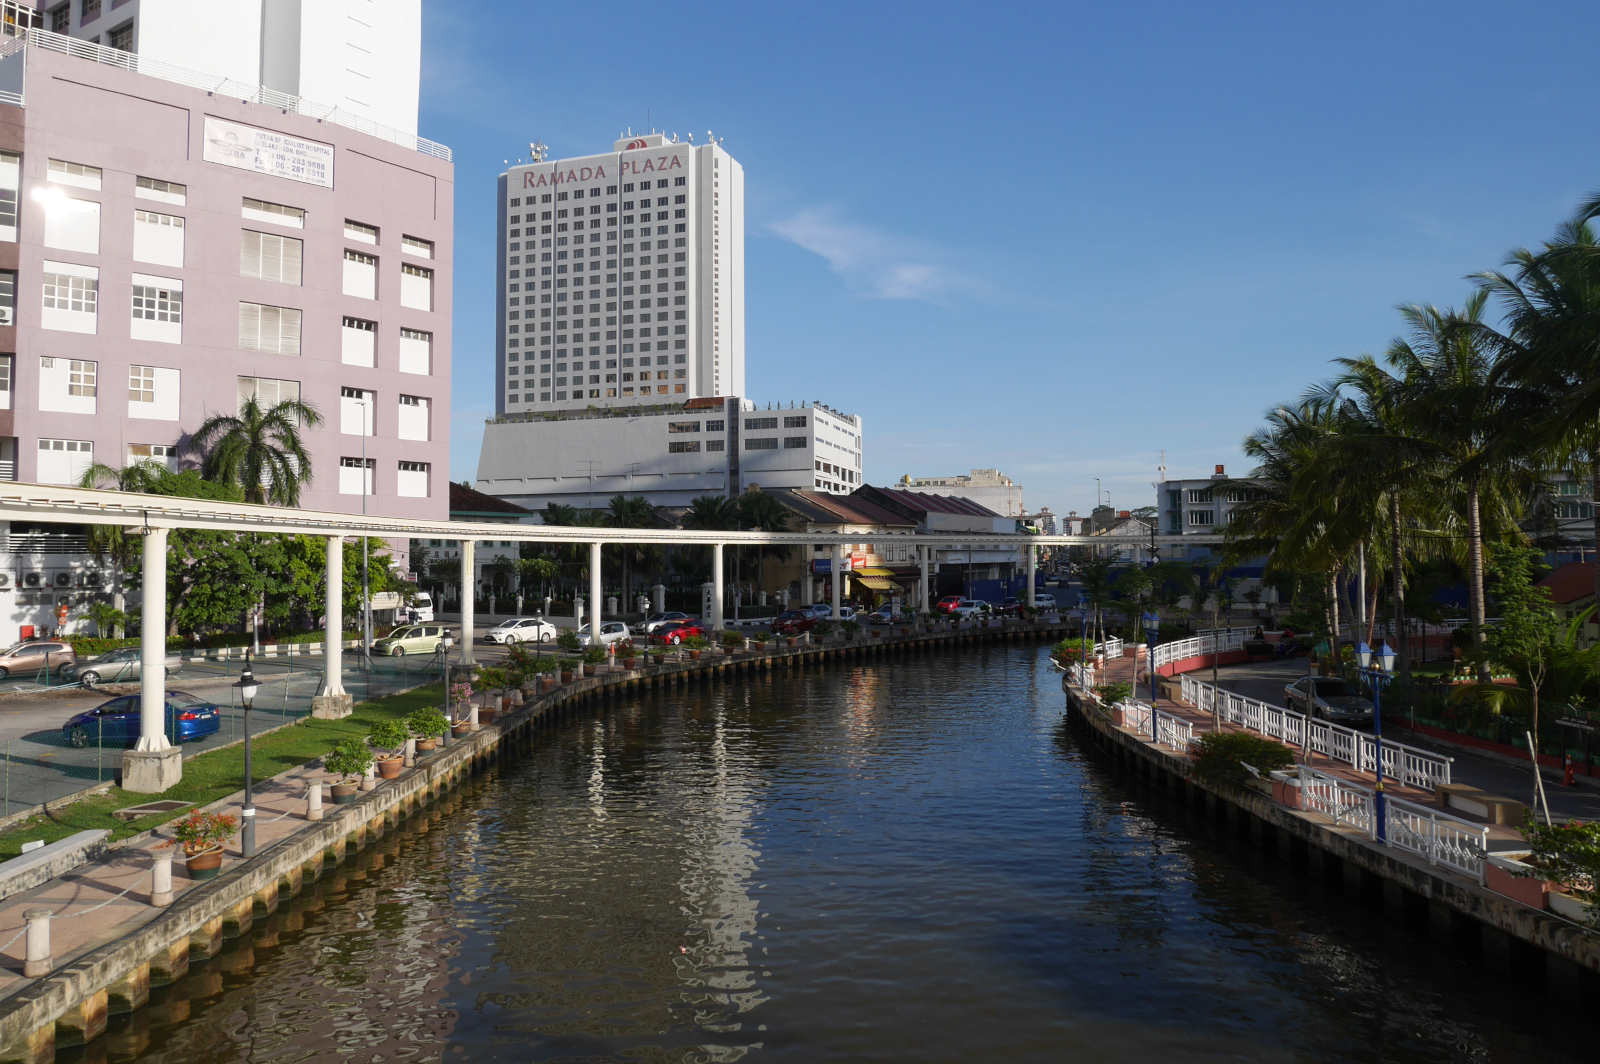 View of the monorail along the Malacca riverfront.